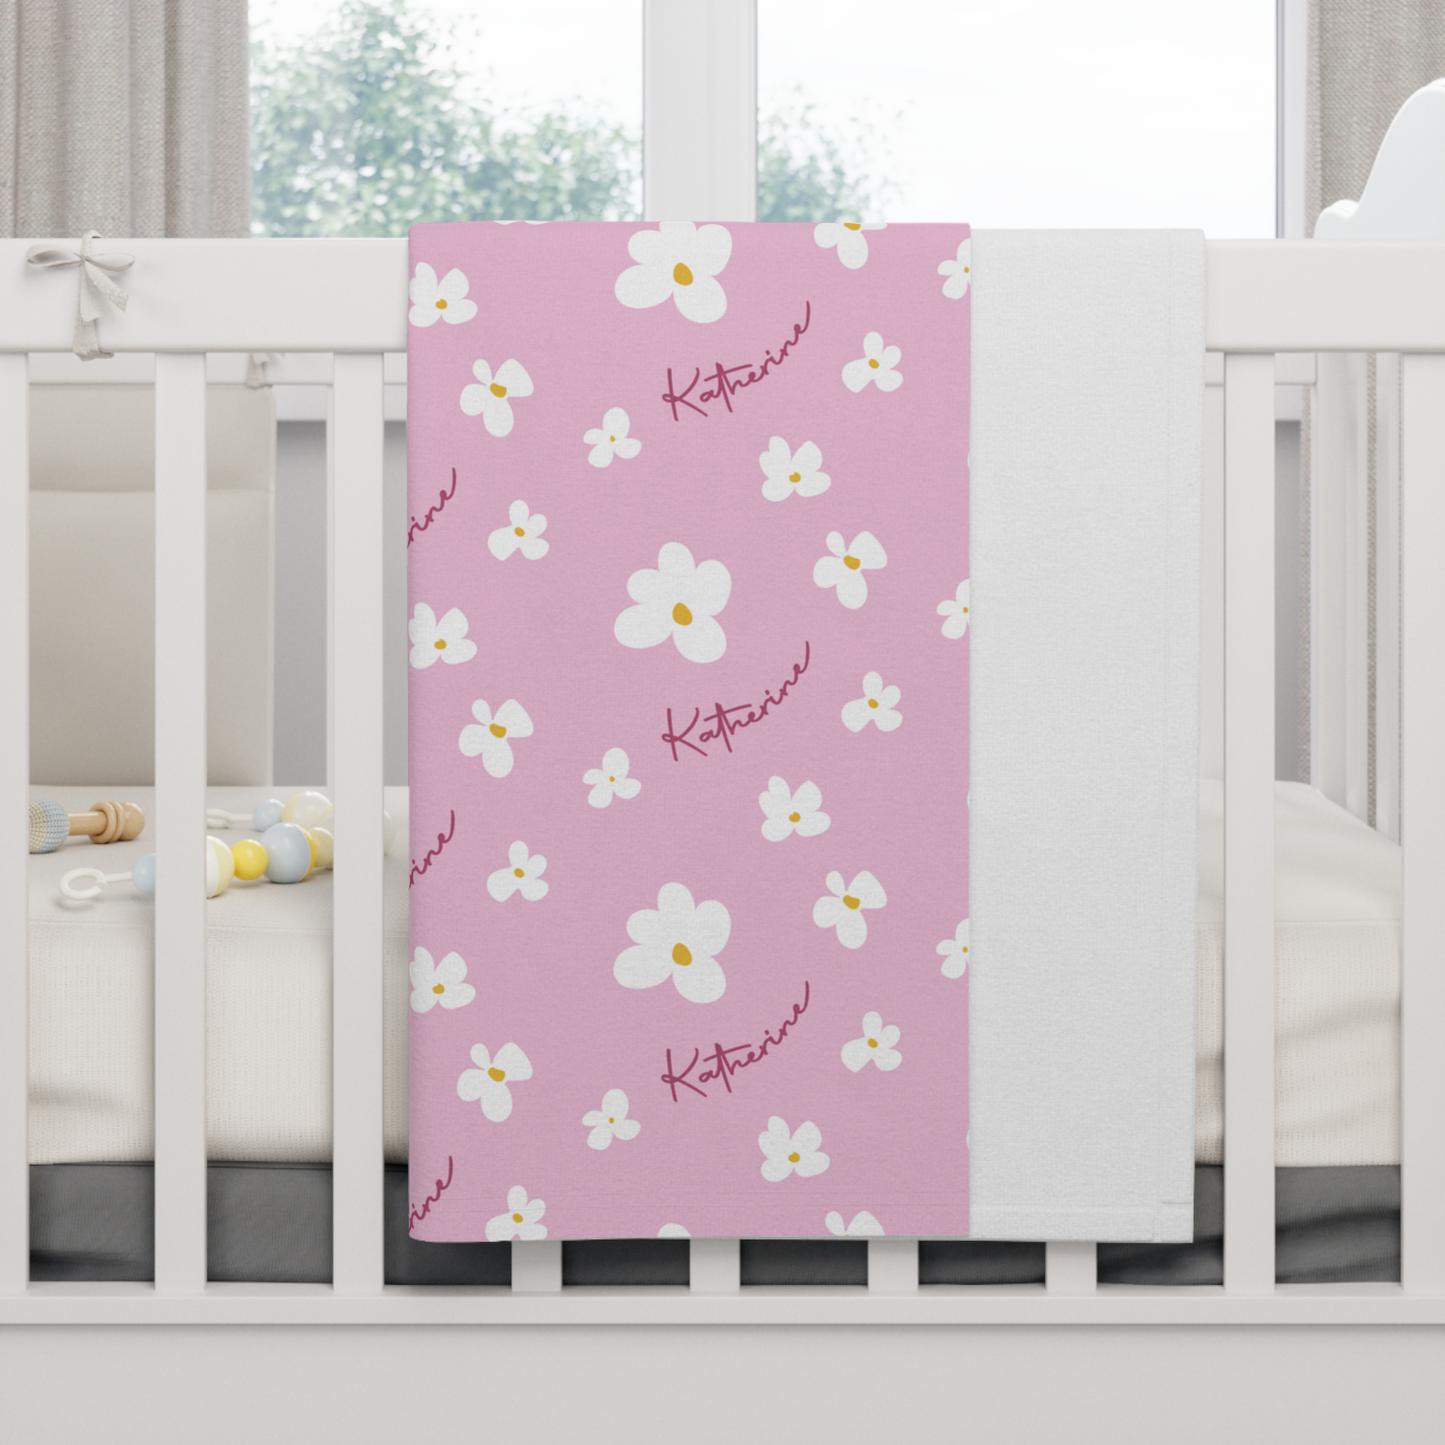 Fleece personalized baby blanket in pink daisy pattern hung over side of white crib with window in the background